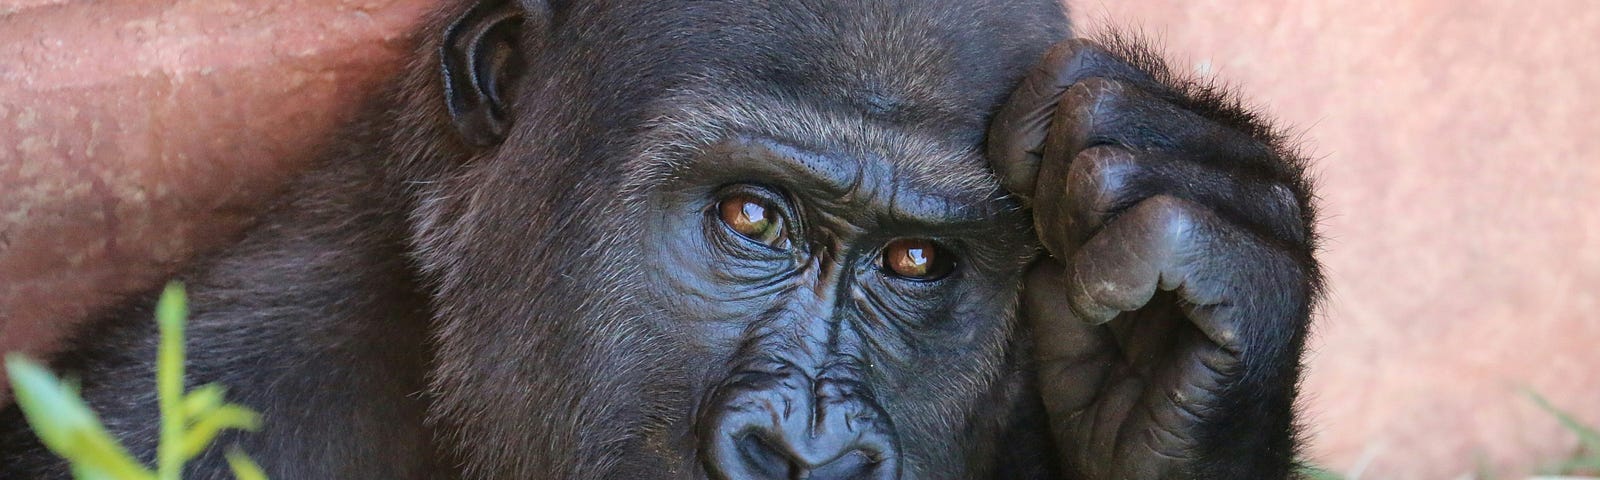 Chimpanzee in thinking pose. We are not what we think.